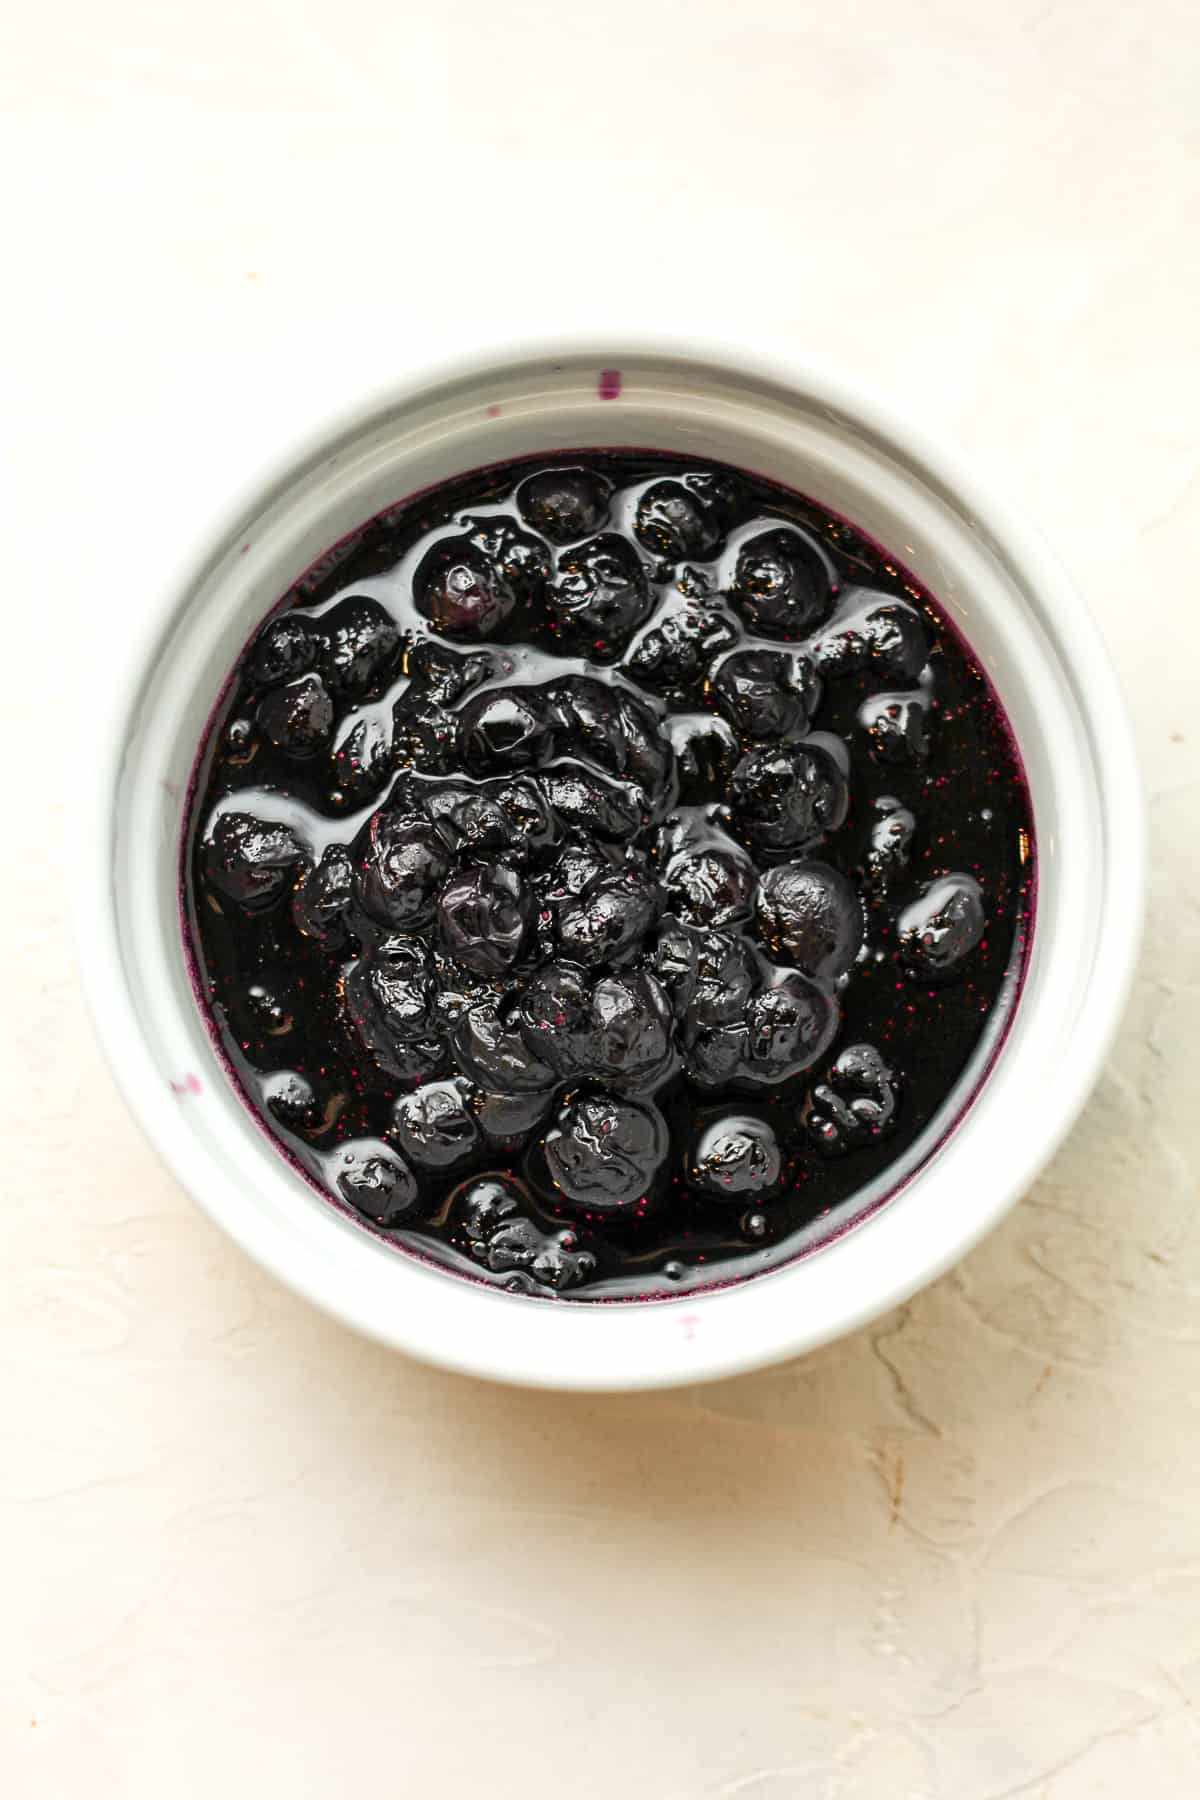 A bowl of cooked blueberries.